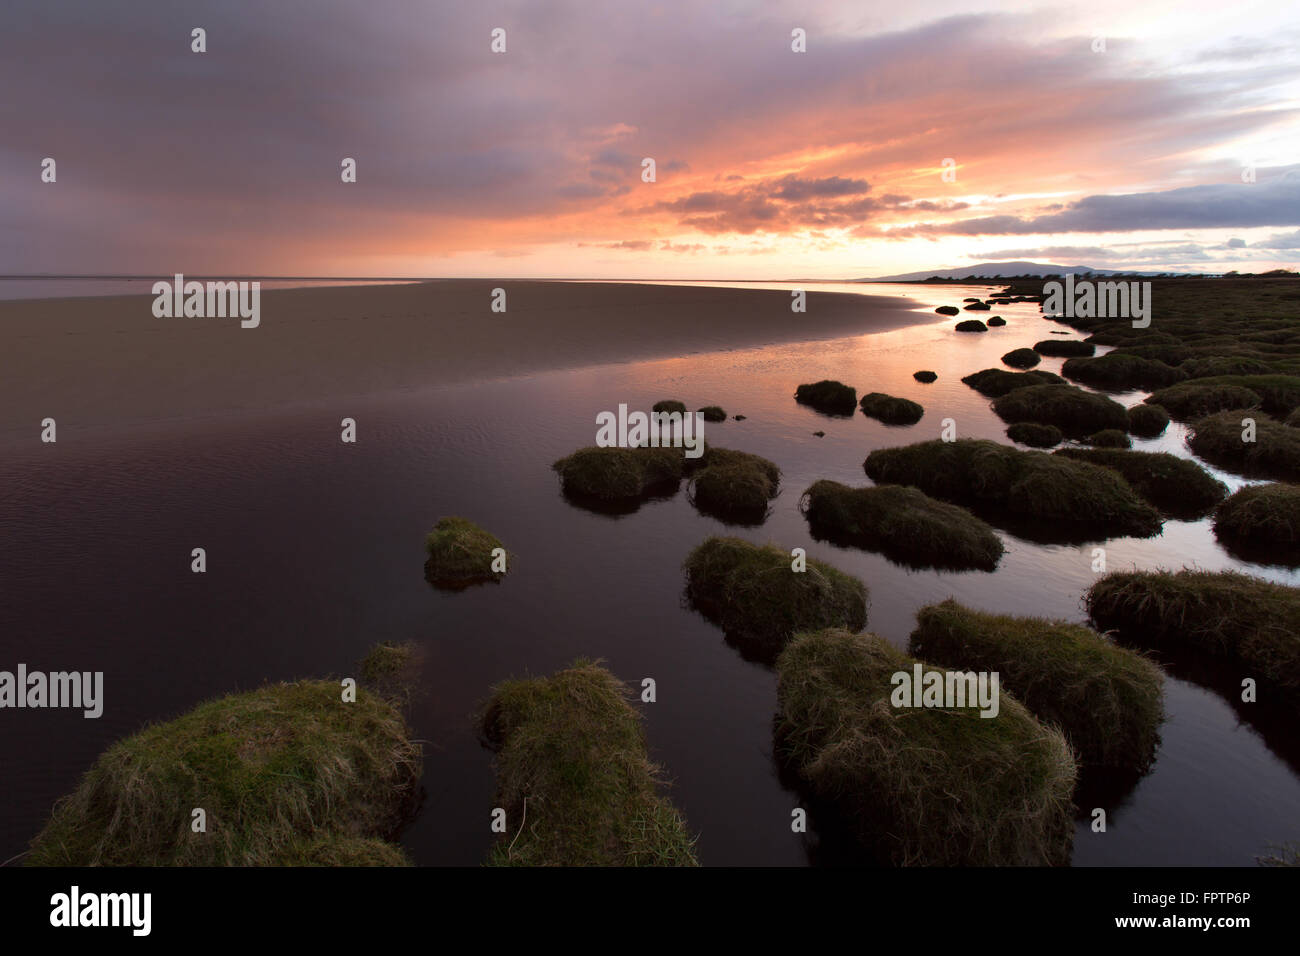 Solway Firth, Scotland. Picturesque view of sunset over the Solway Firth saltmarsh and beach, near the village of Powfoot. Stock Photo